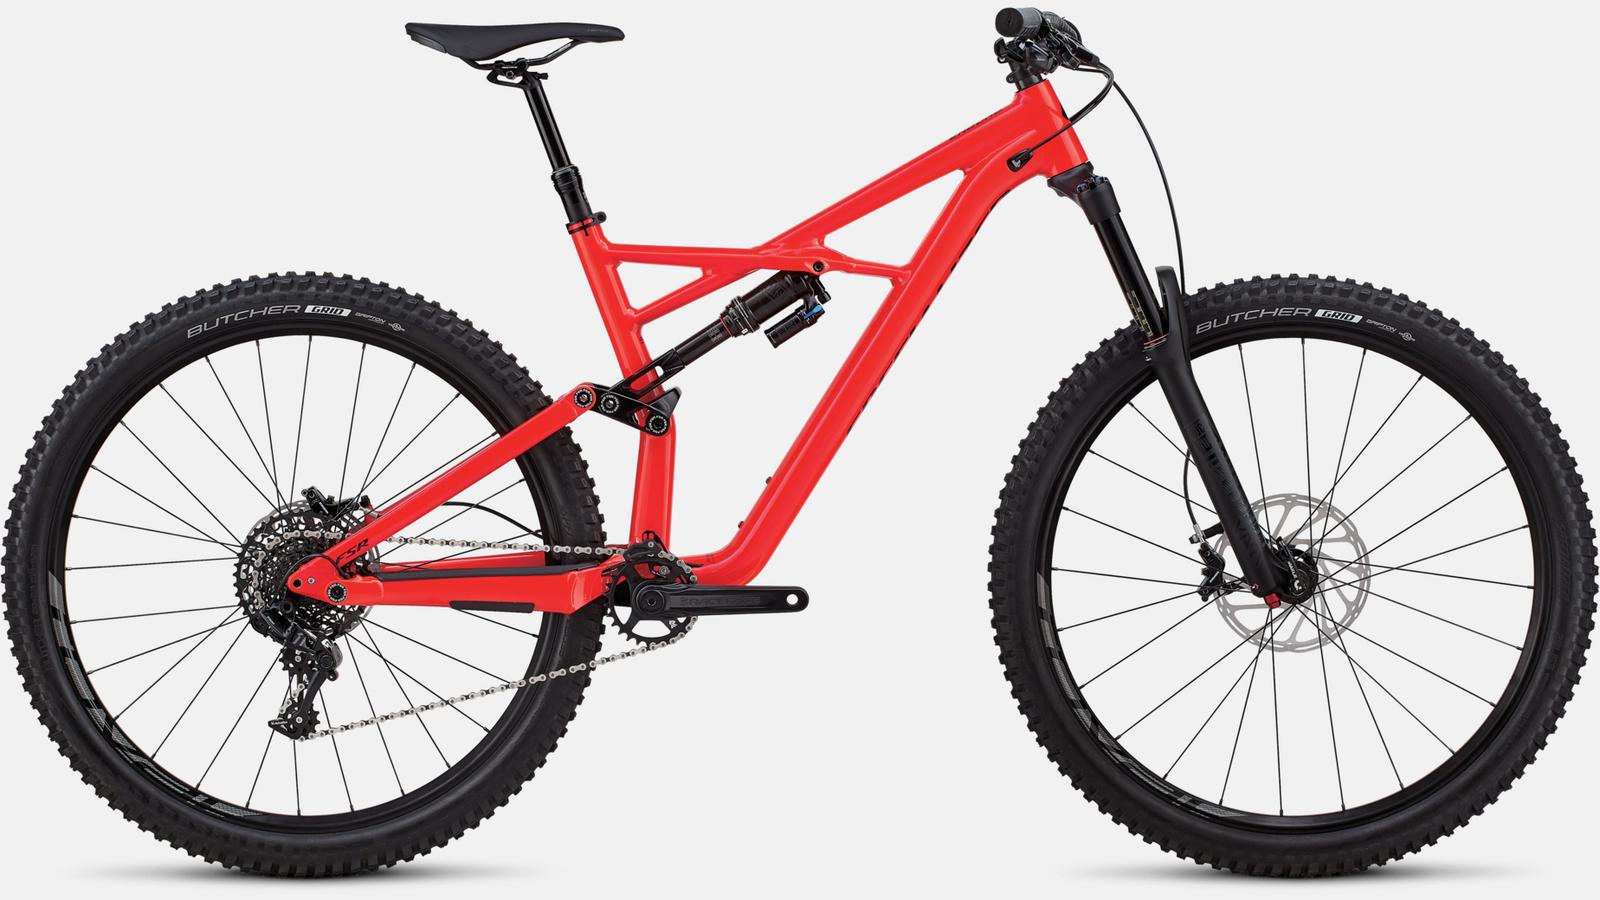 Touch-up paint for 2018 Specialized Enduro Comp 29/6Fattie - Gloss Rocket Red